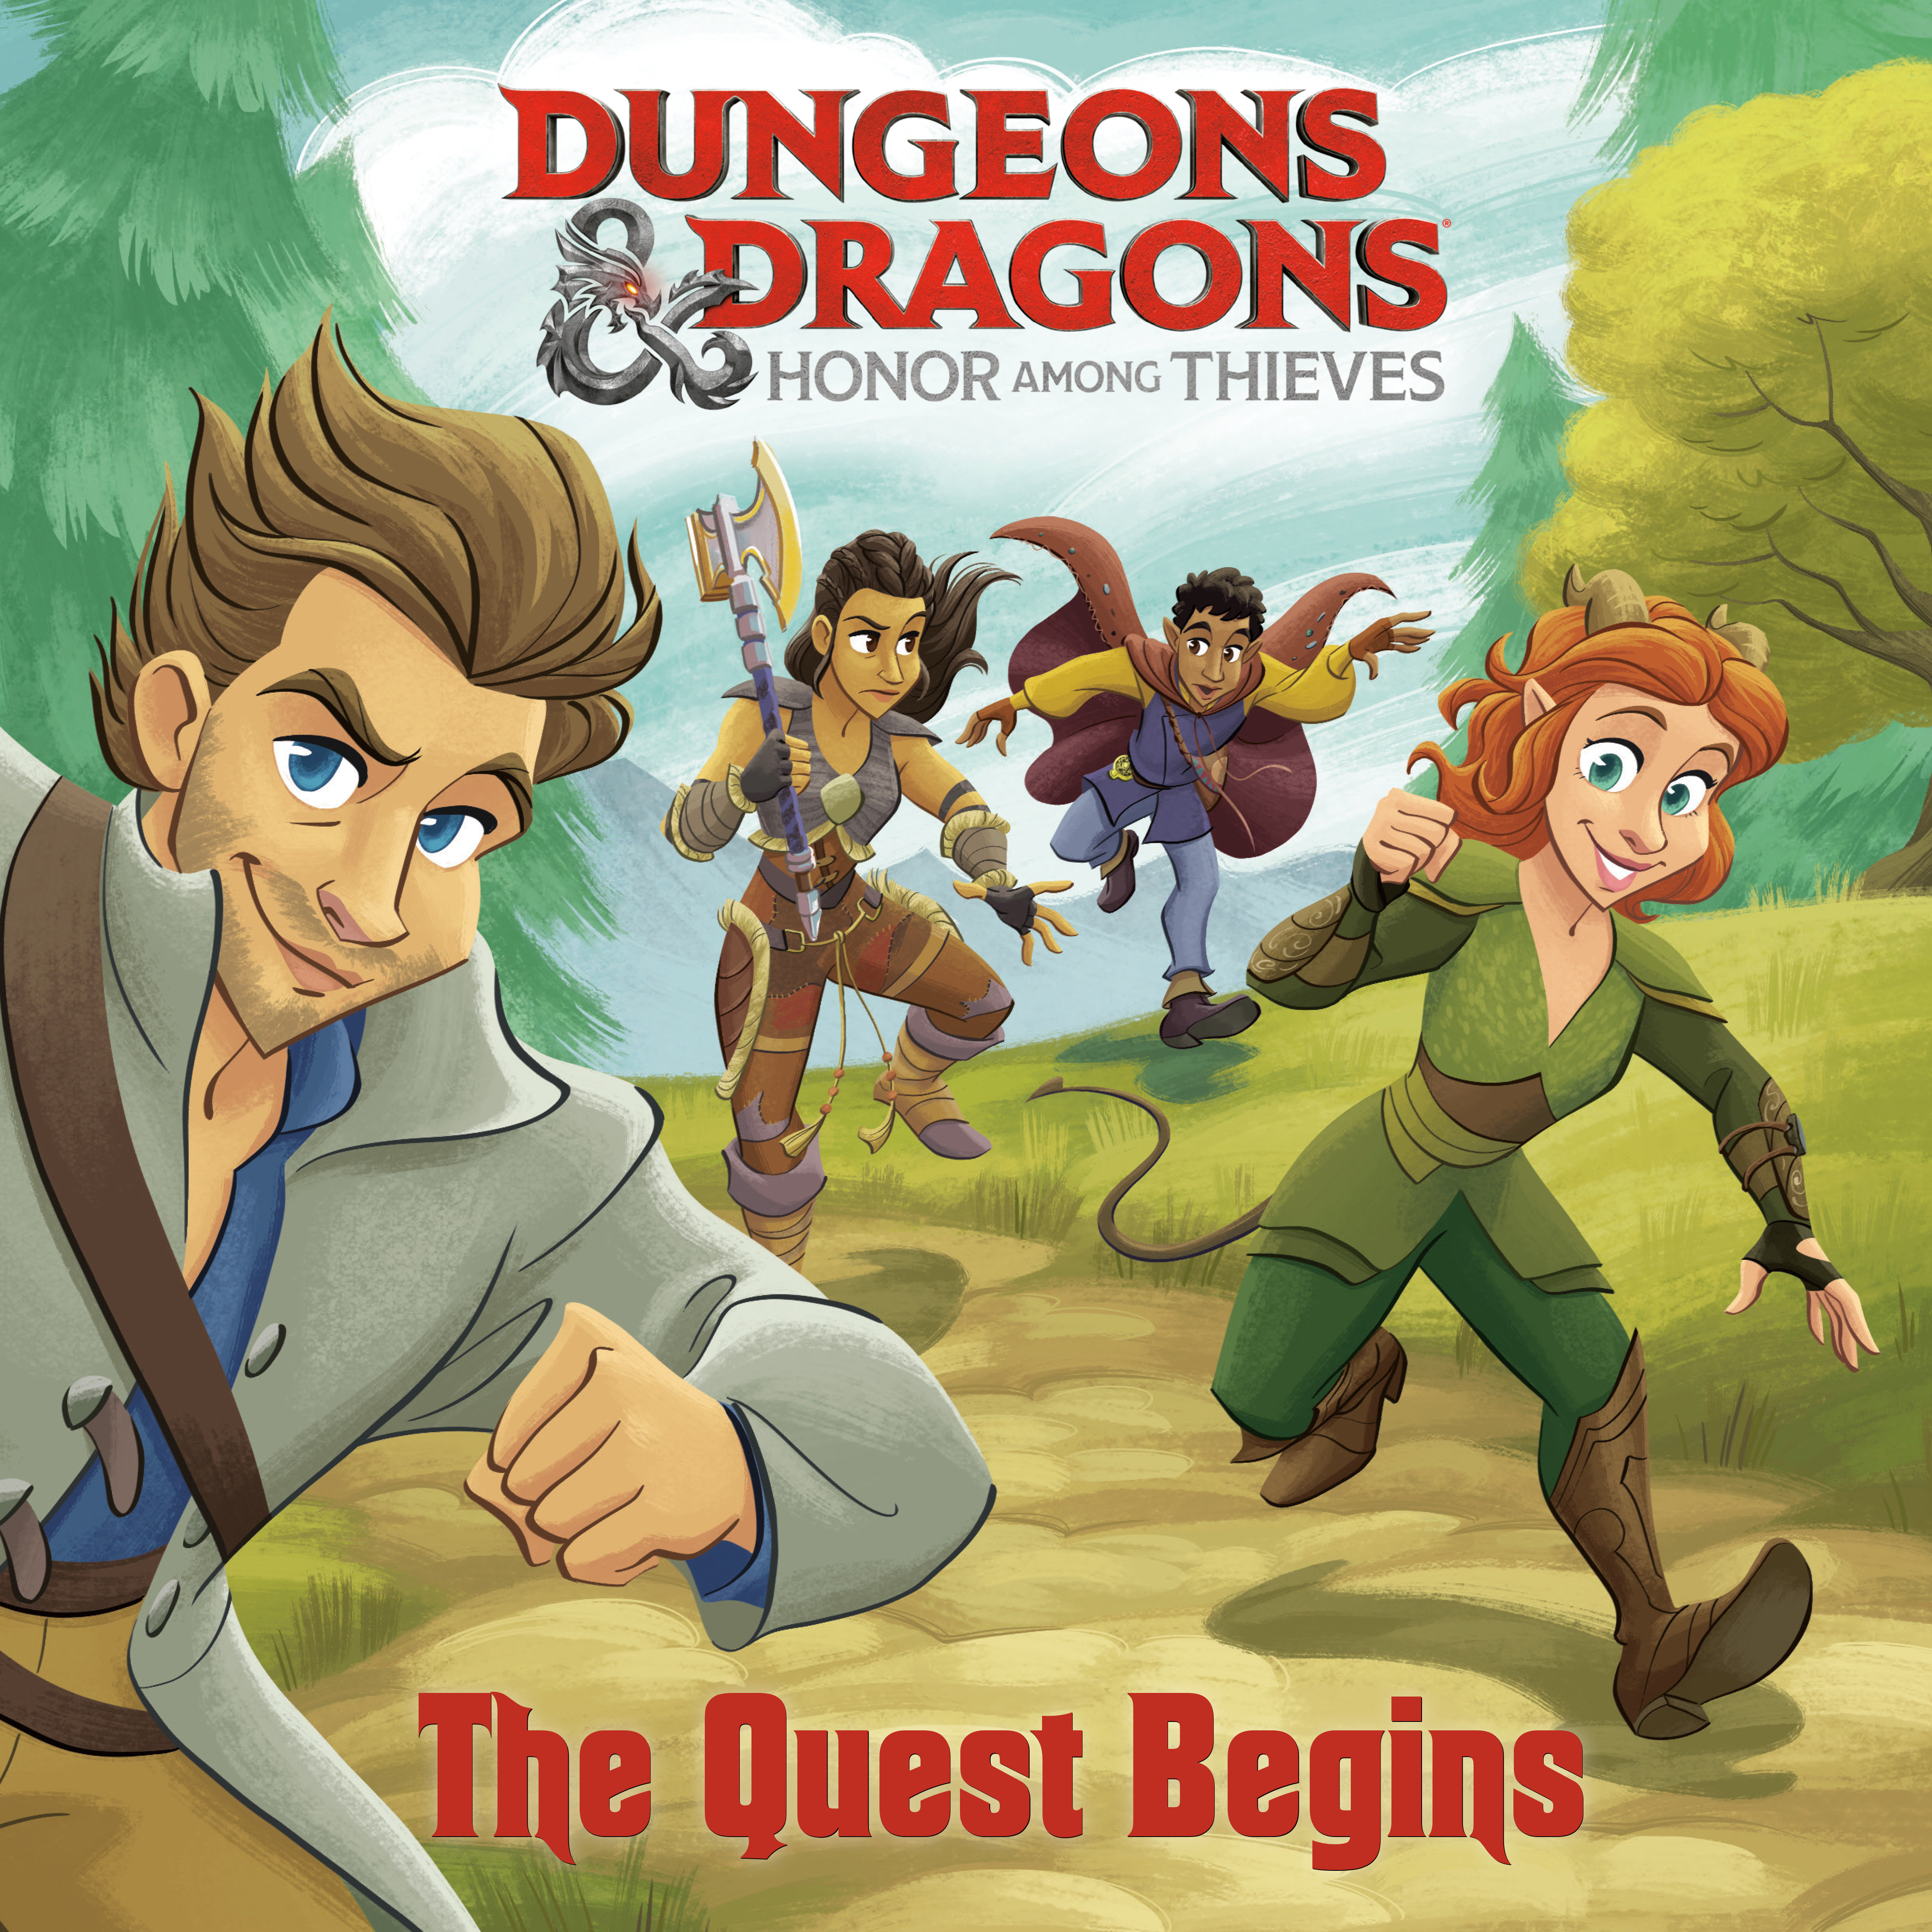 The Quest Begins (Dungeons & Dragons Honor Among Thieves)